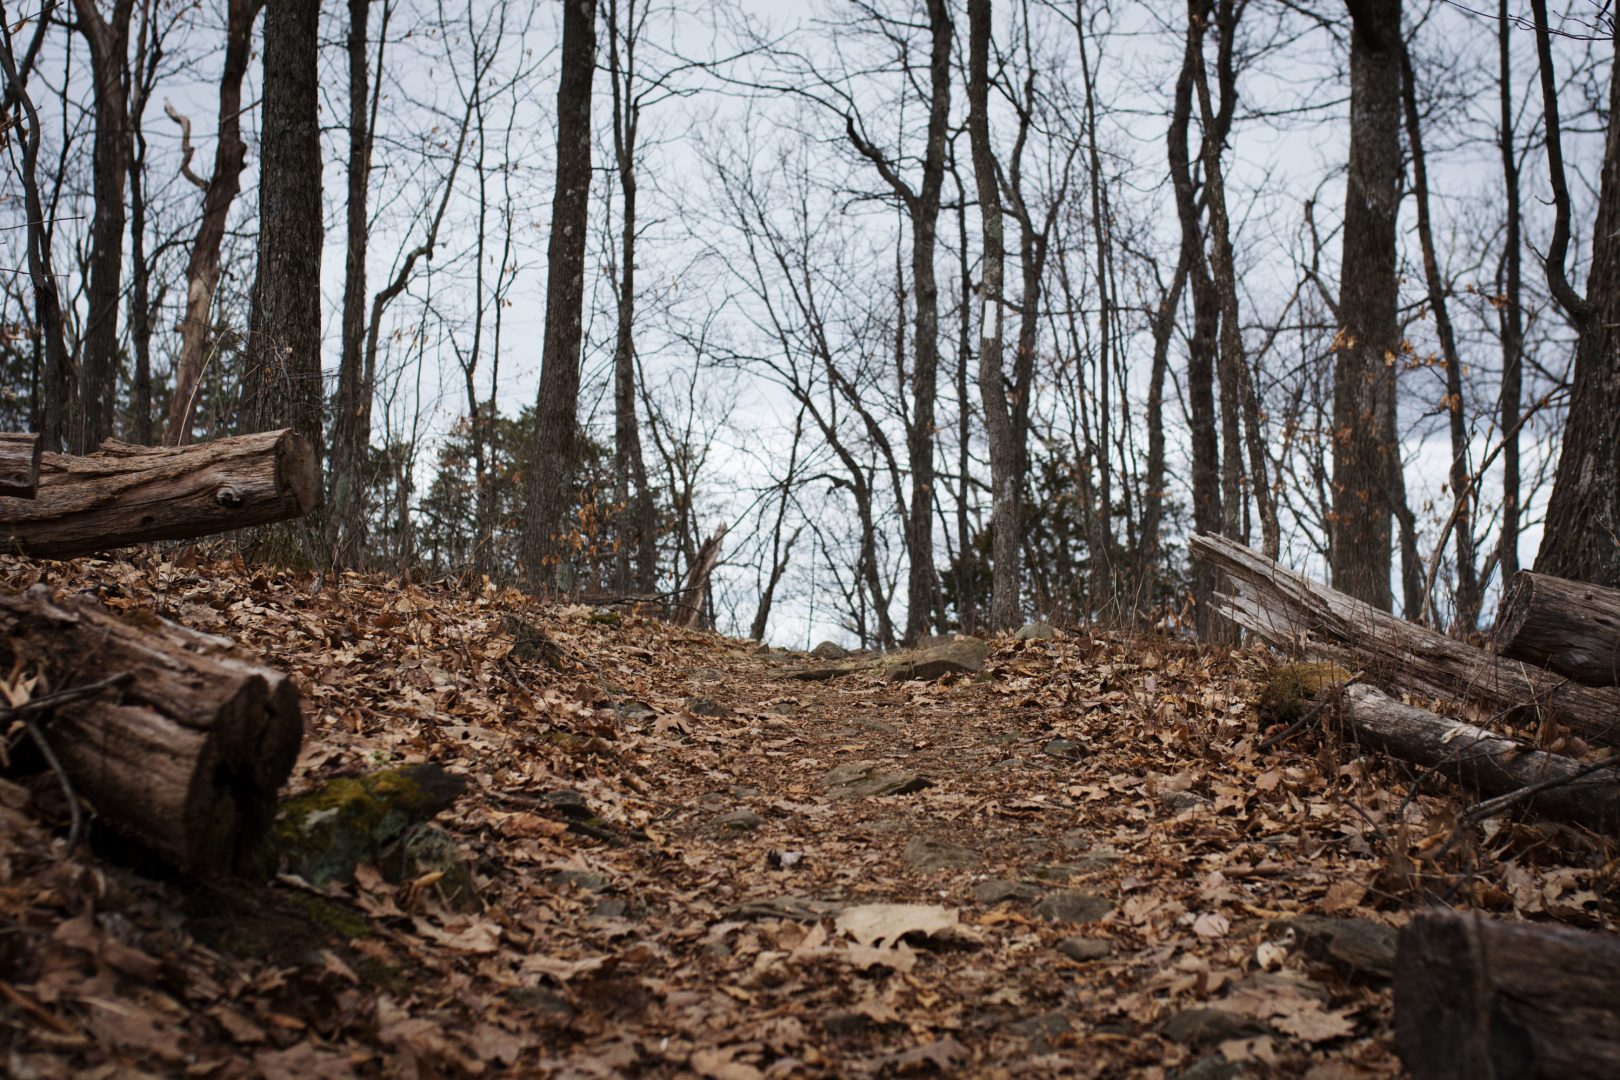 The Appalachian Trail in central Virginia, near where the proposed Atlantic Coast Pipeline would cross. The trail stretches from Georgia to Maine and is hiked by more than a million people each year.